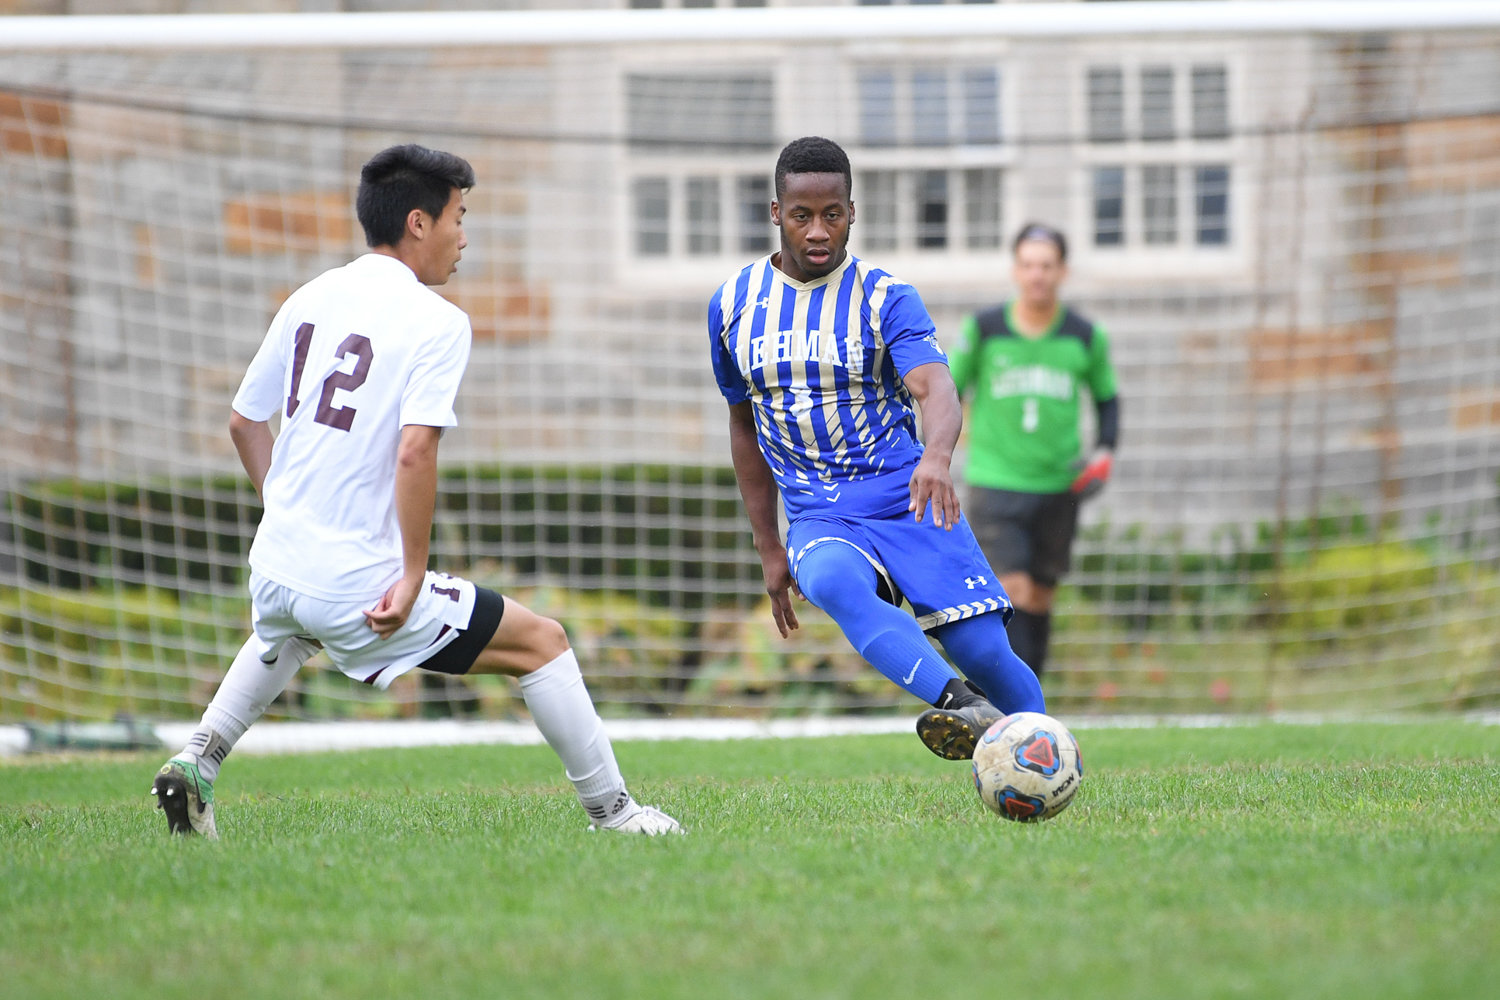 Lehman College defender Dominic Dixon scored the game’s only goal early in overtime as the Lightning won its third overtime game of the season with a 1-0 verdict over John Jay last Saturday.